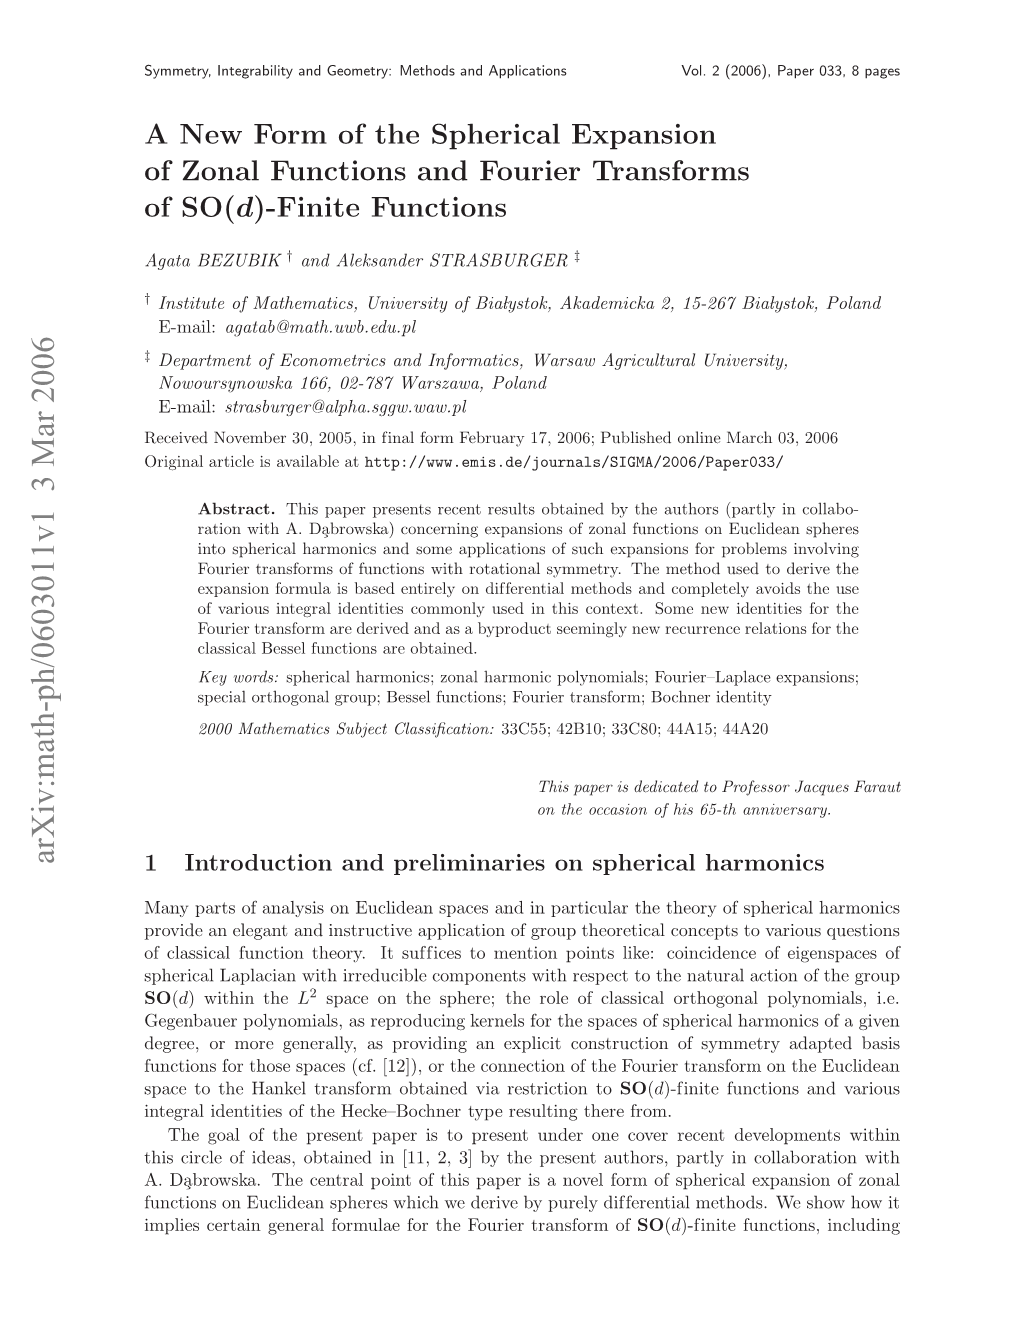 A New Form of the Spherical Expansion of Zonal Functions And